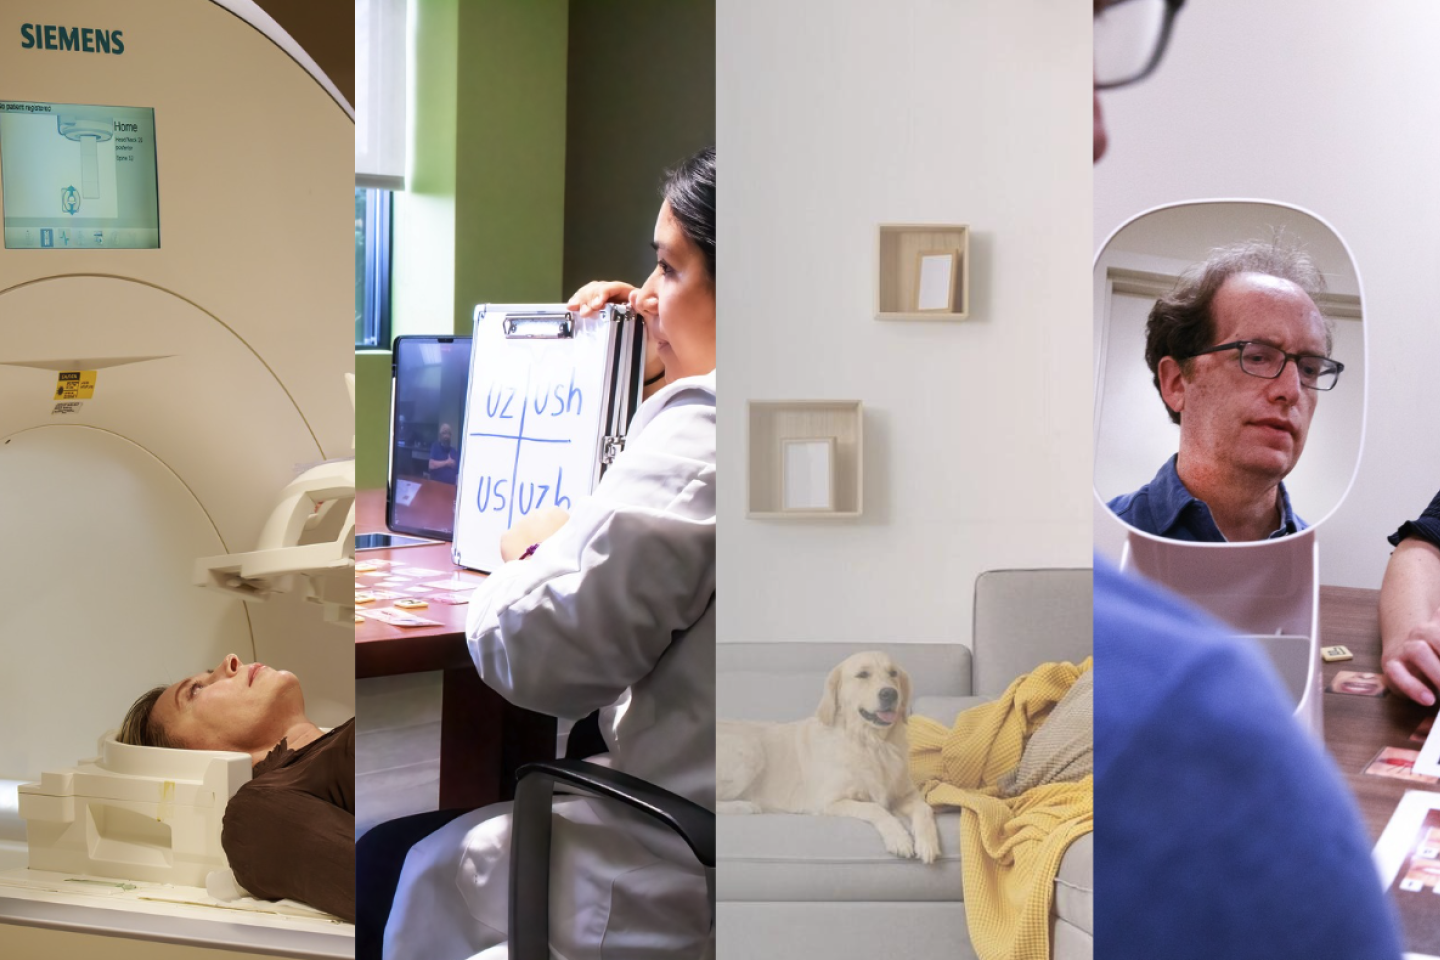 Collage of 4 graphics: person in an MRI machine, a female clinician helping a man across the table with stroke-induced reading challenges, a dog sitting on a couch, and a man wearing glasses viewing himself in a mirror while practicing reading after stroke.